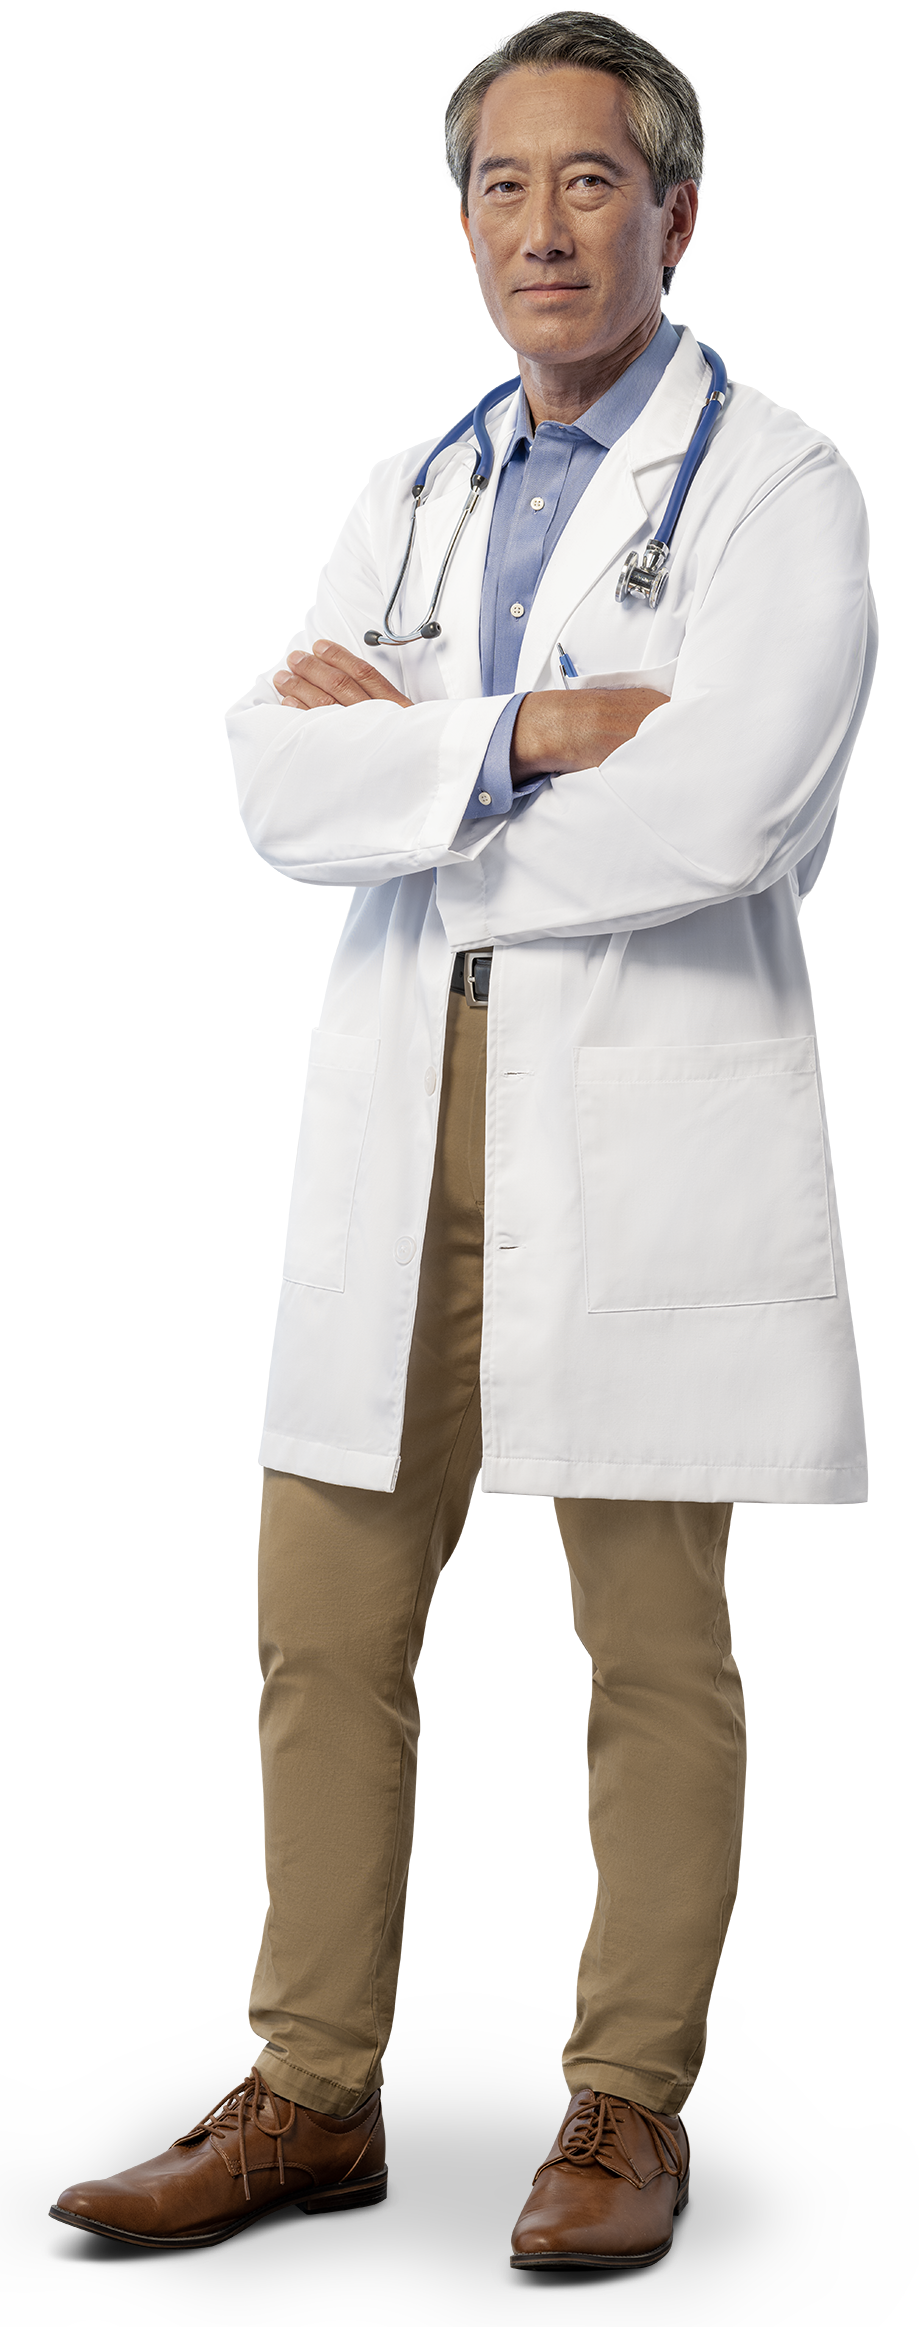 Male doctor standing with arms crossed.